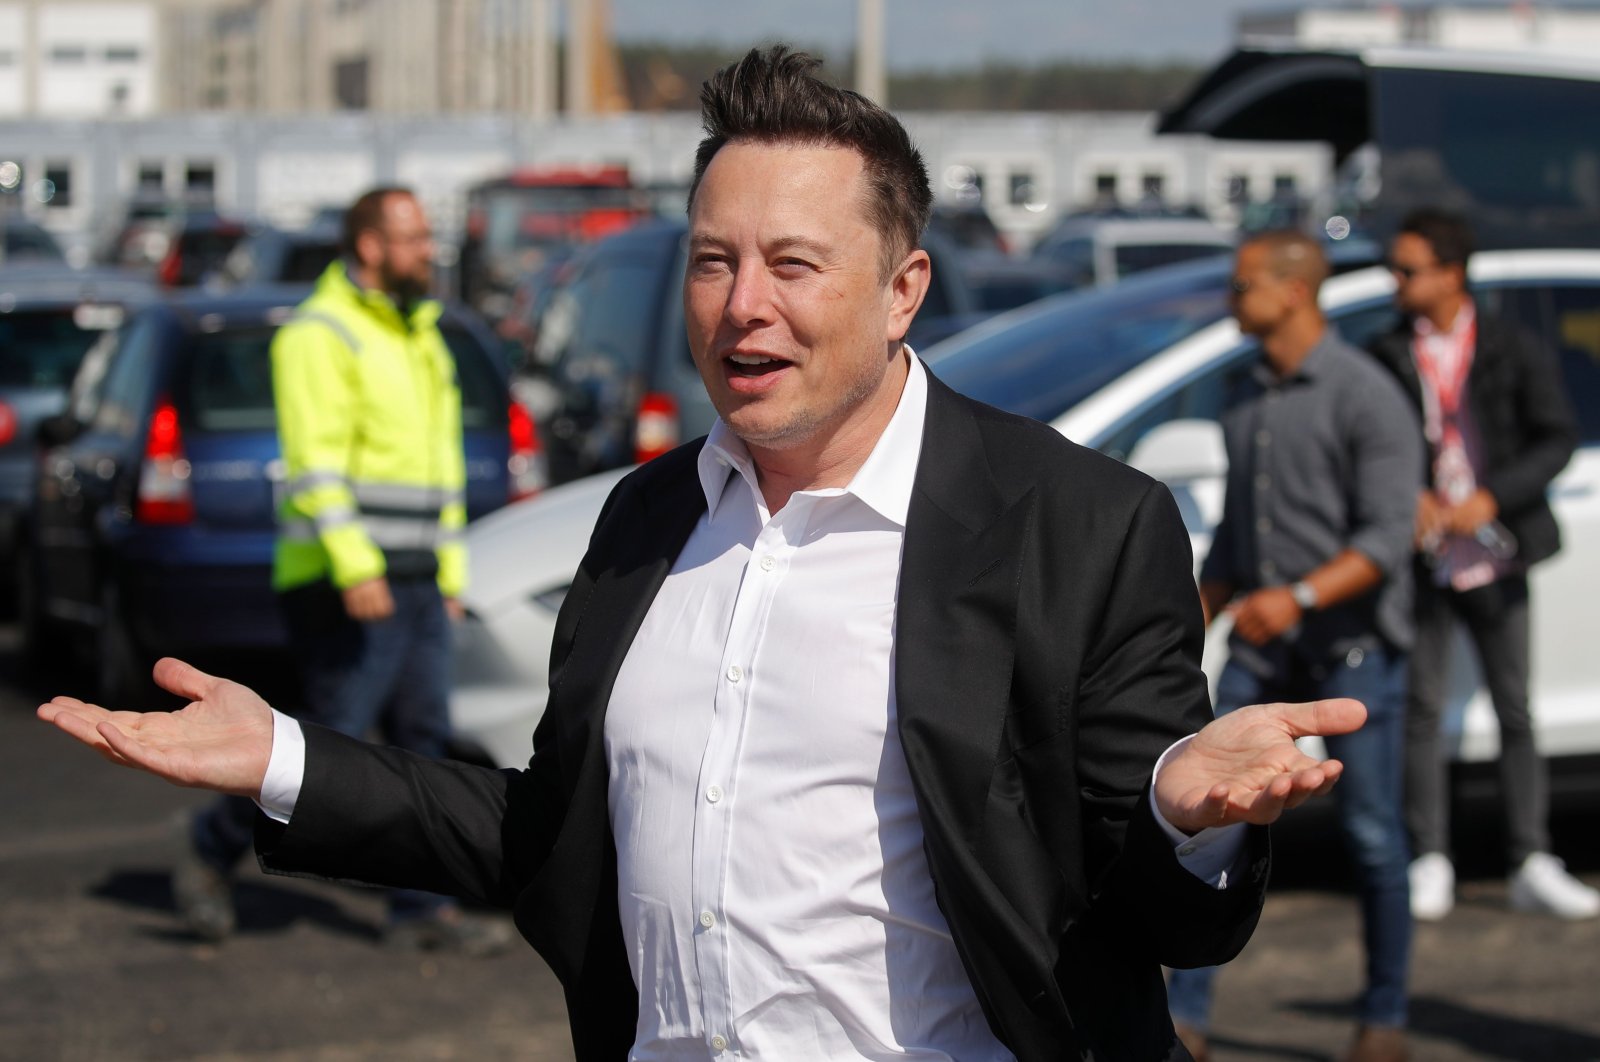 Tesla CEO Elon Musk gestures as he arrives to visit the construction site of the future U.S. electric car giant Tesla, in Grünheide near Berlin, Germany, Sept. 3, 2020. (AFP Photo)